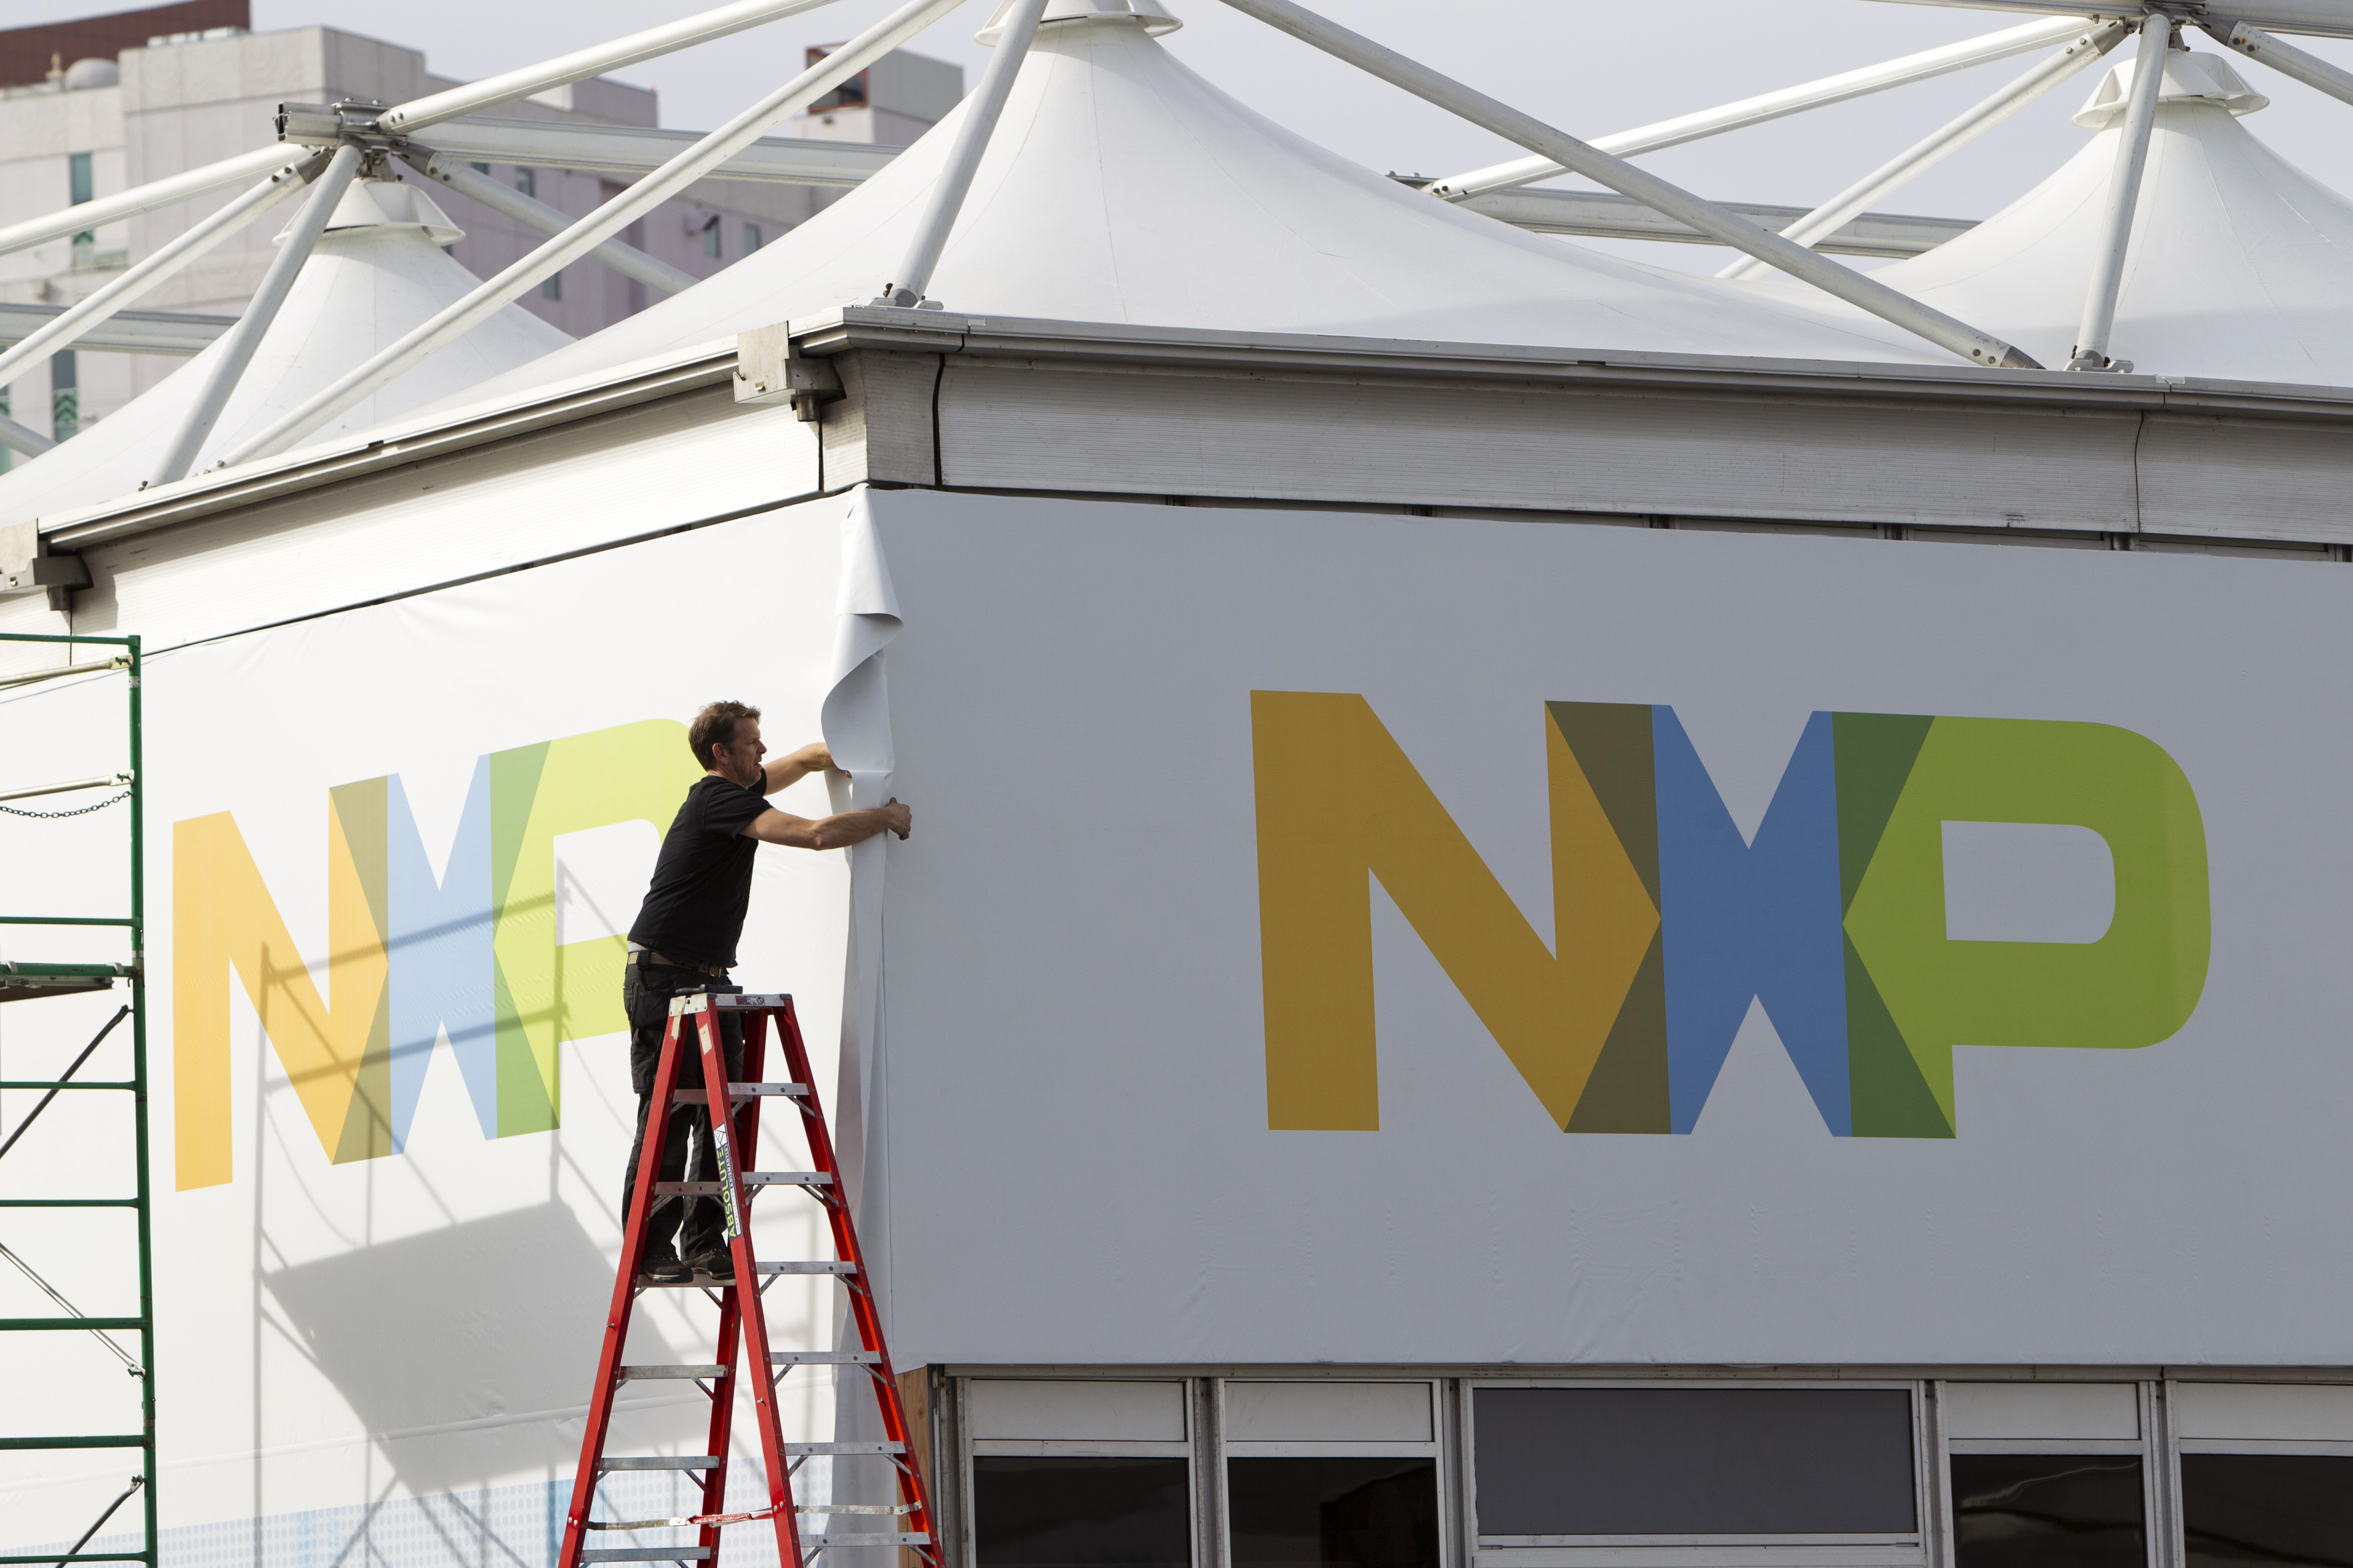 A man works on a tent for NXP Semiconductors in preparation for the 2015 International Consumer Electronics Show (CES) at Las Vegas Convention Center in Las Vegas